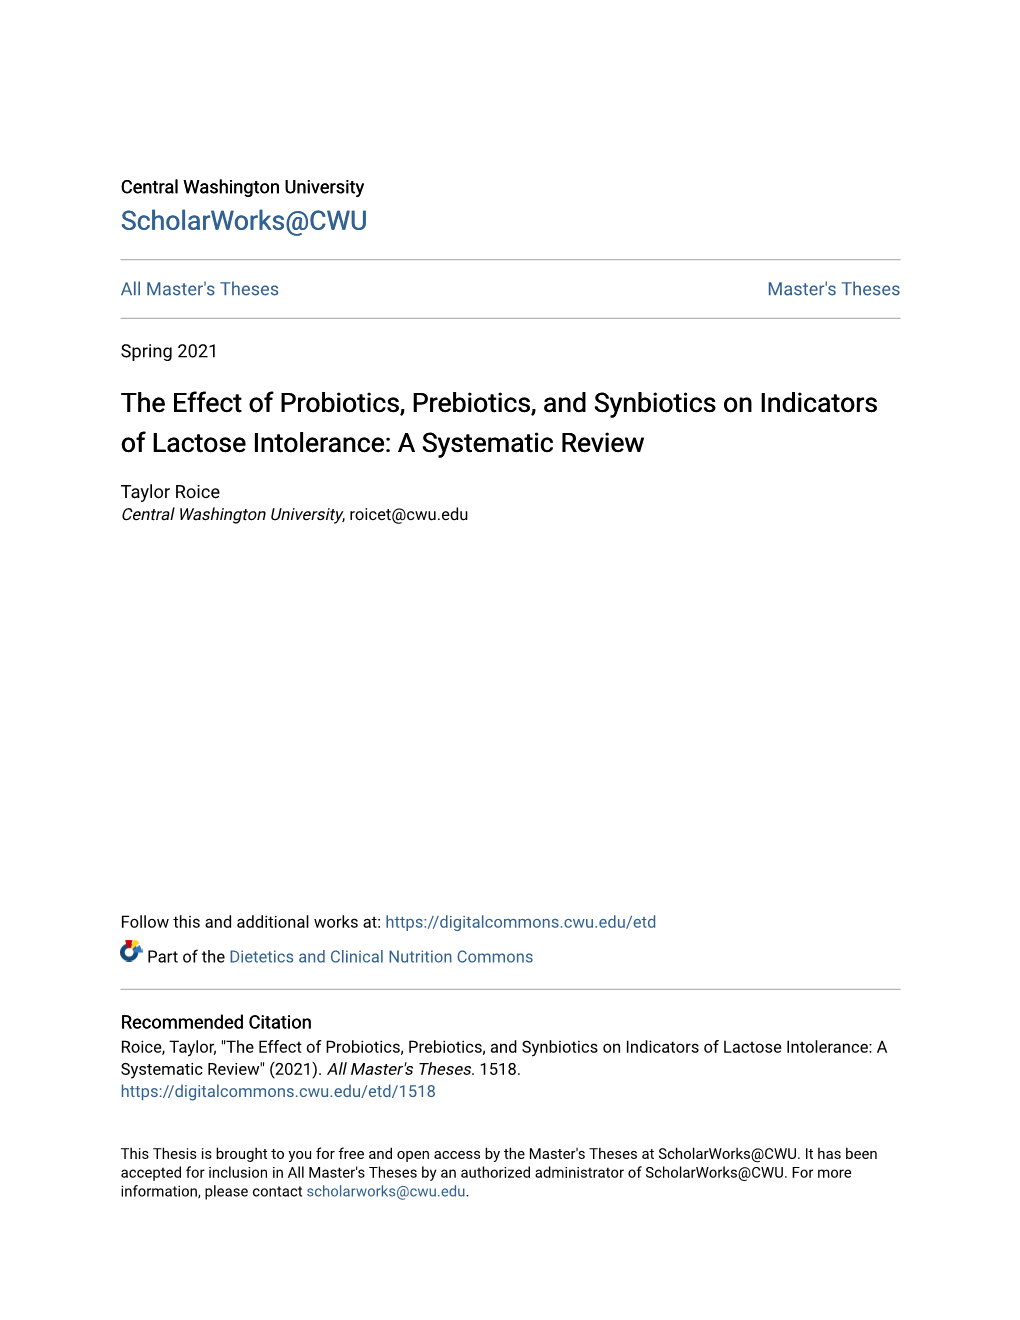 The Effect of Probiotics, Prebiotics, and Synbiotics on Indicators of Lactose Intolerance: a Systematic Review